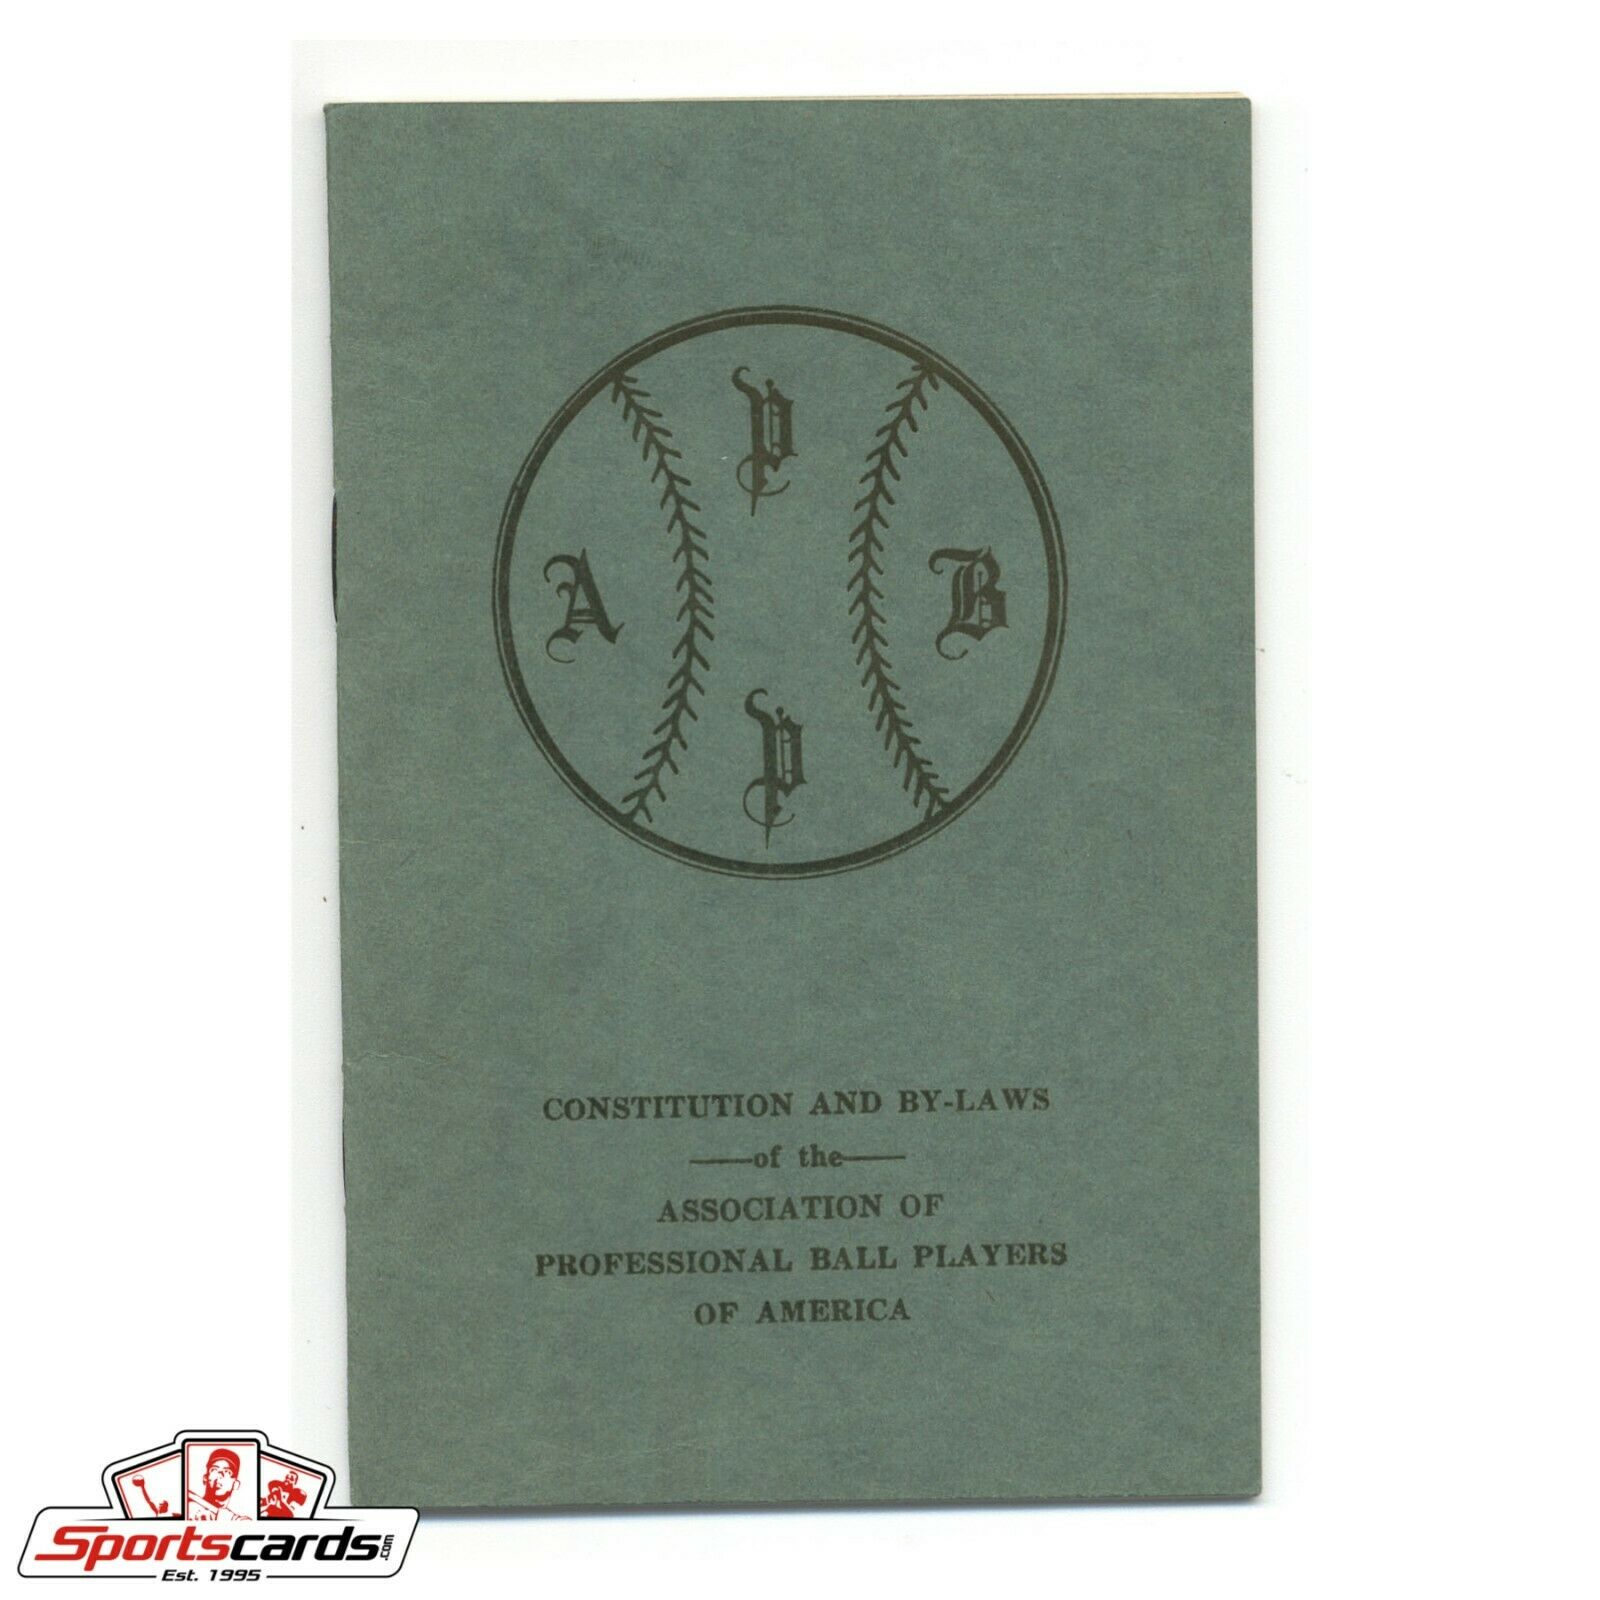 Association of Professional Ball Players 1924 Constitution and By-Laws Booklet